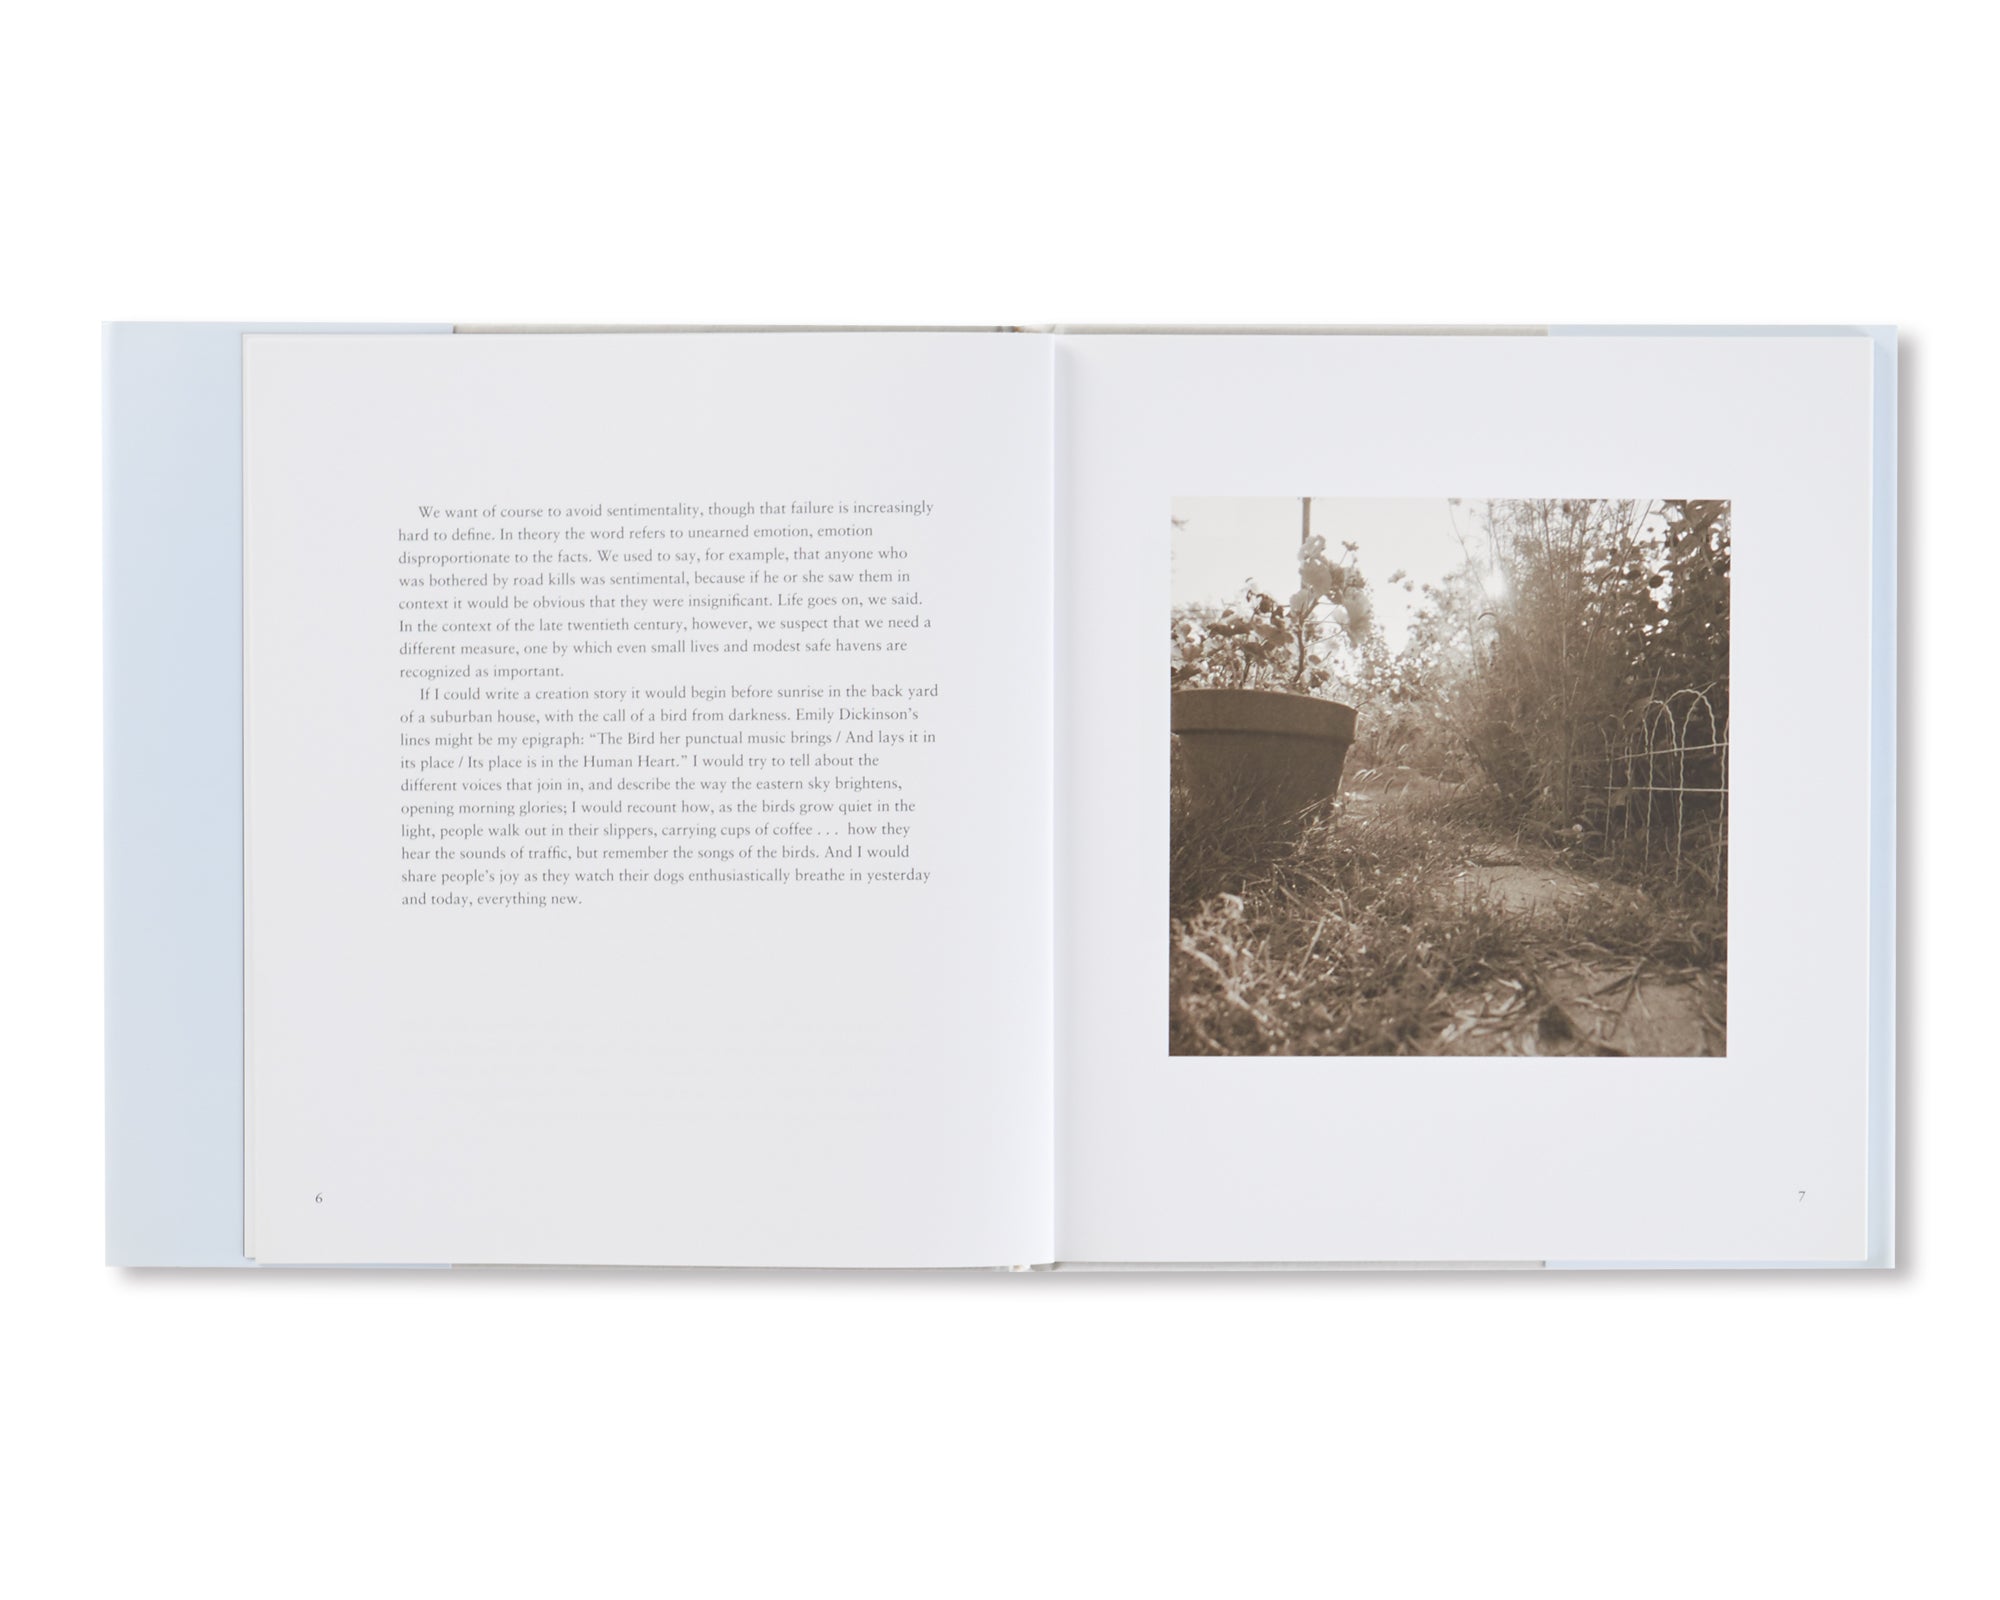 I HEAR THE LEAVES AND LOVE THE LIGHT by Robert Adams